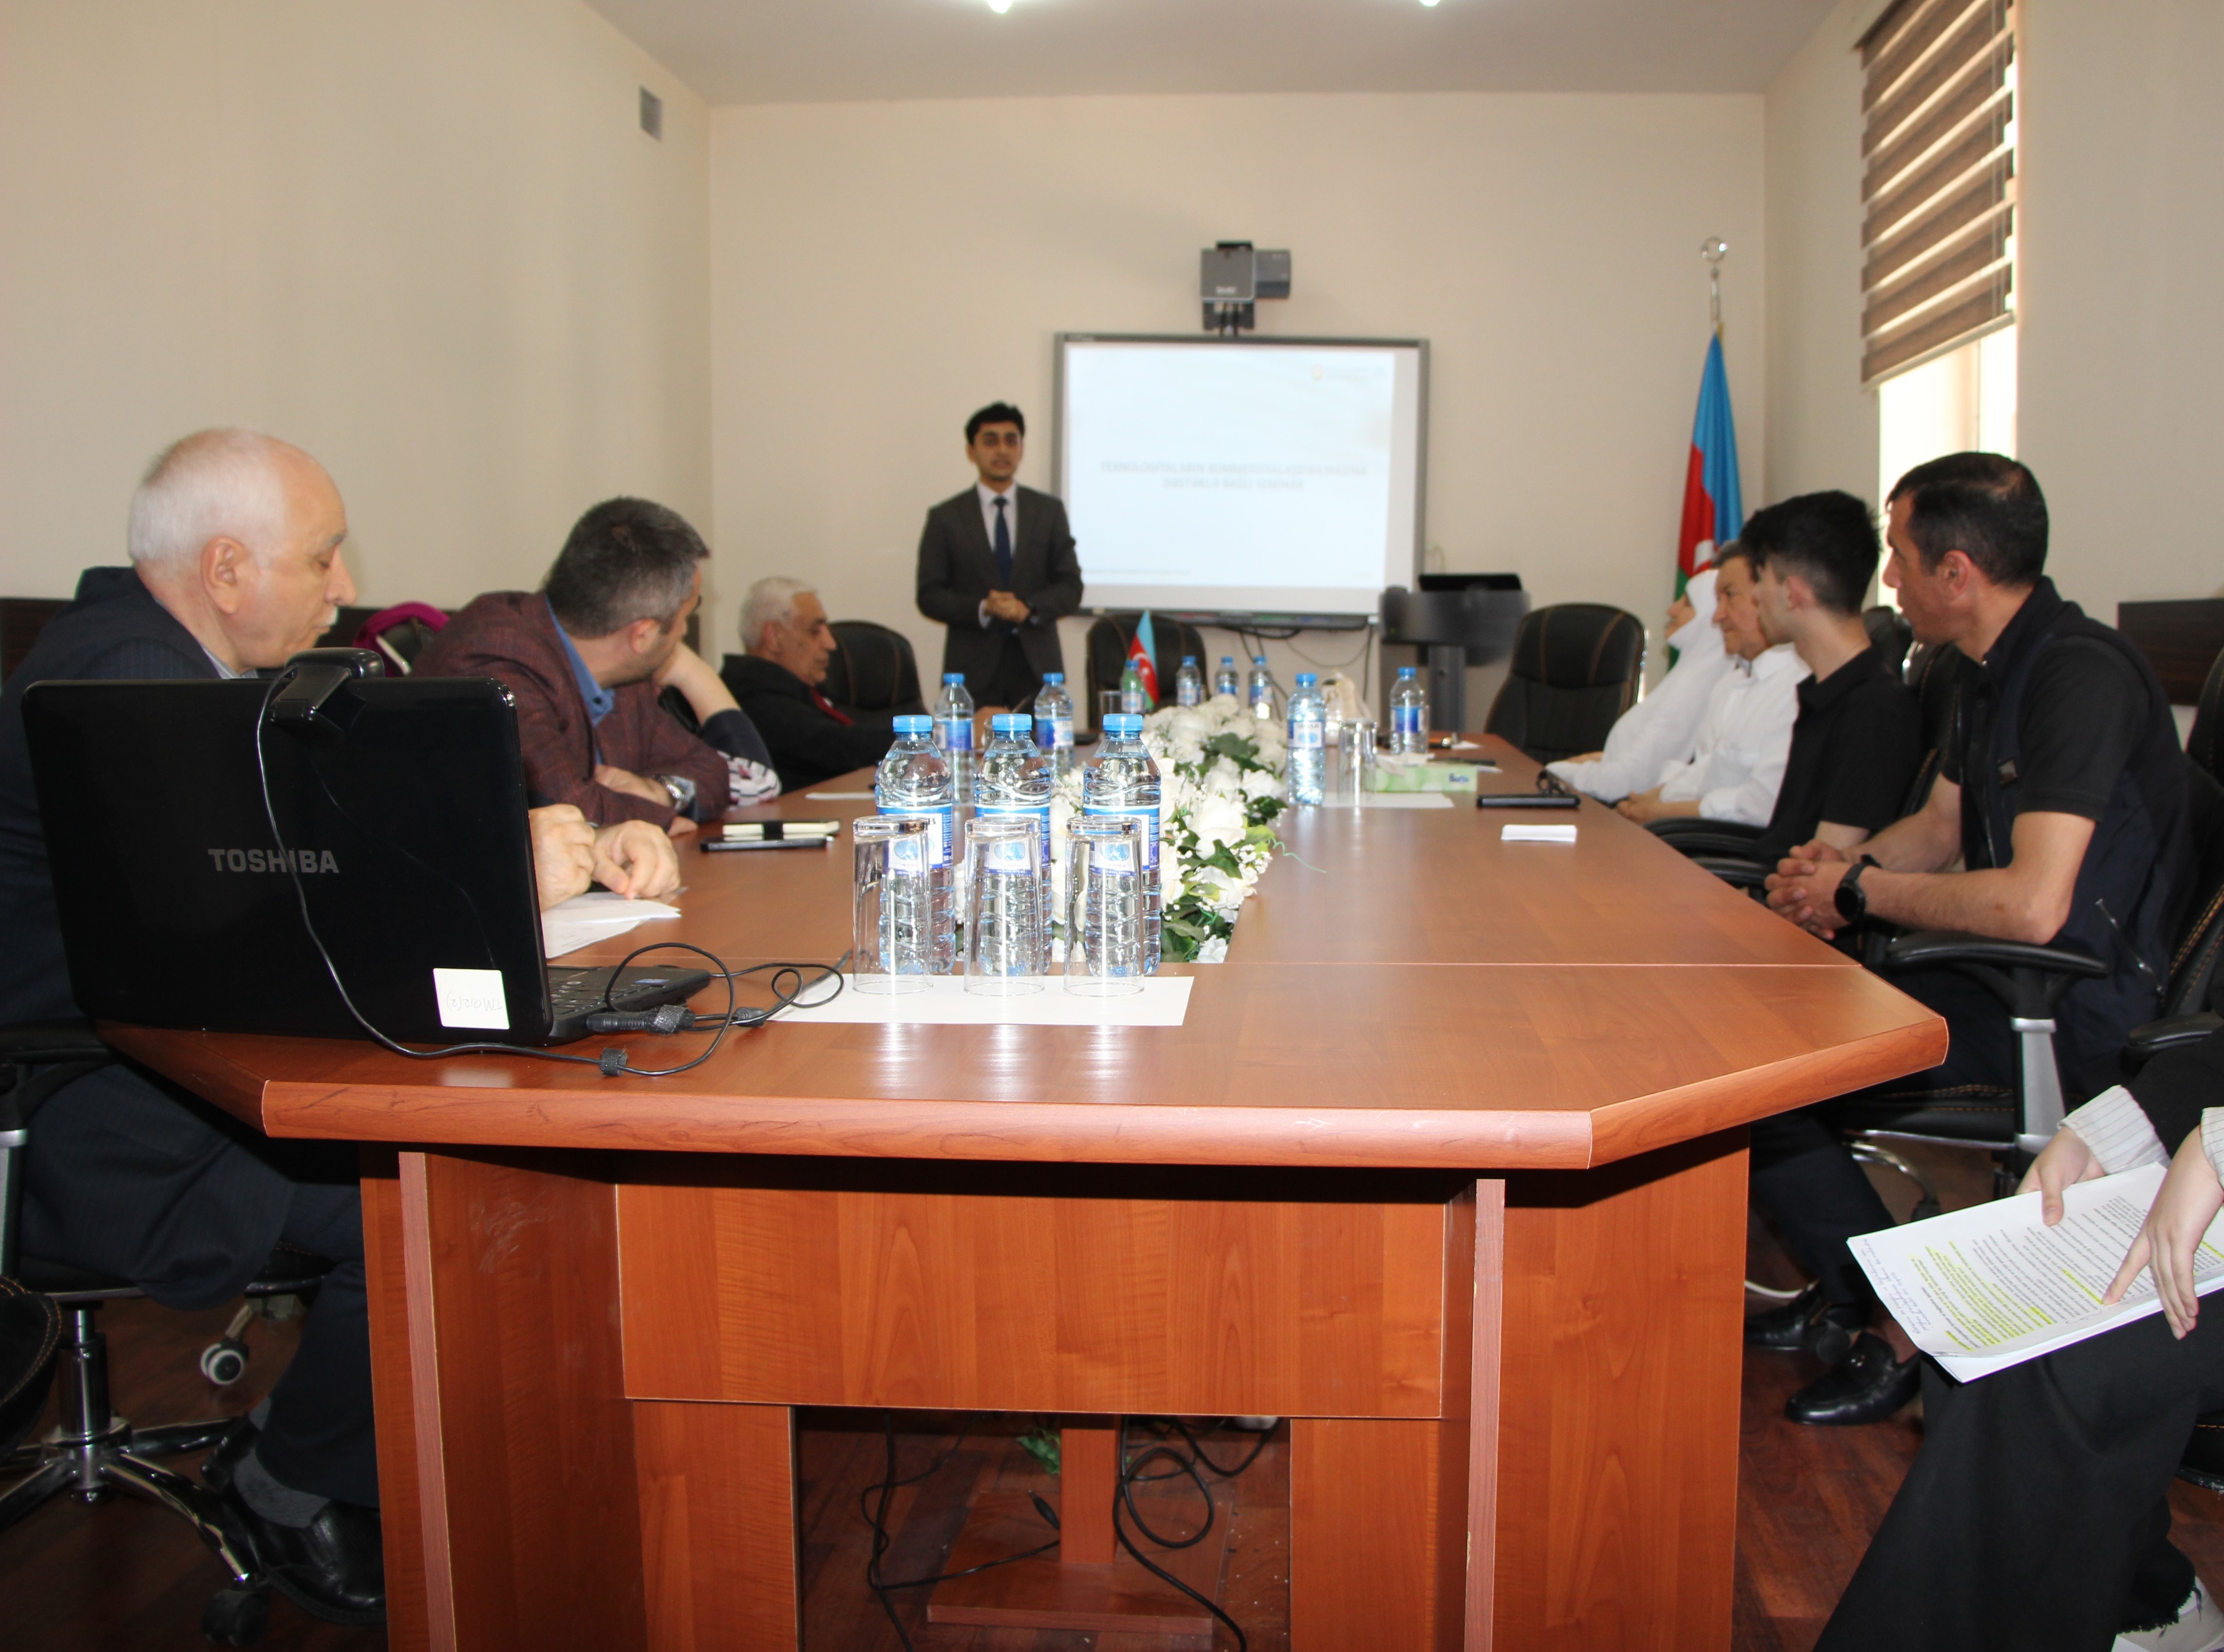 A seminar was held with the participation of inventors